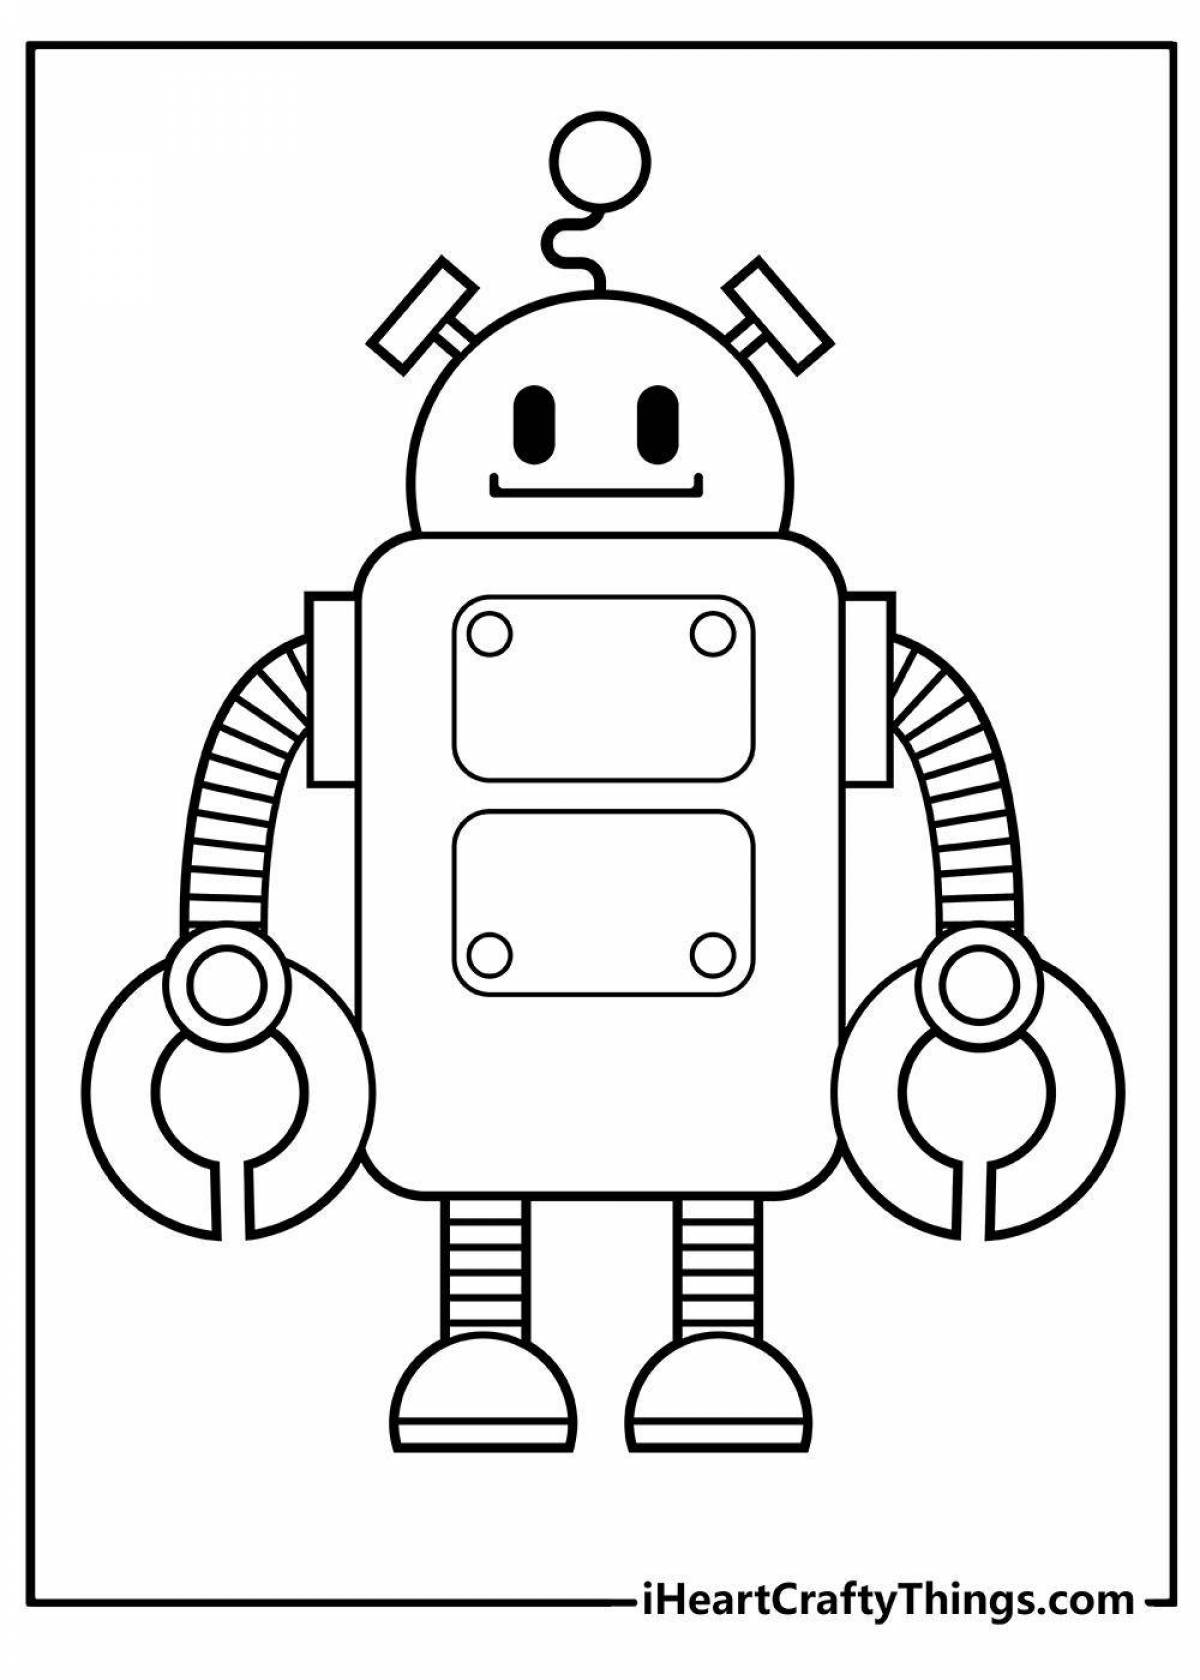 Robot by numbers #5